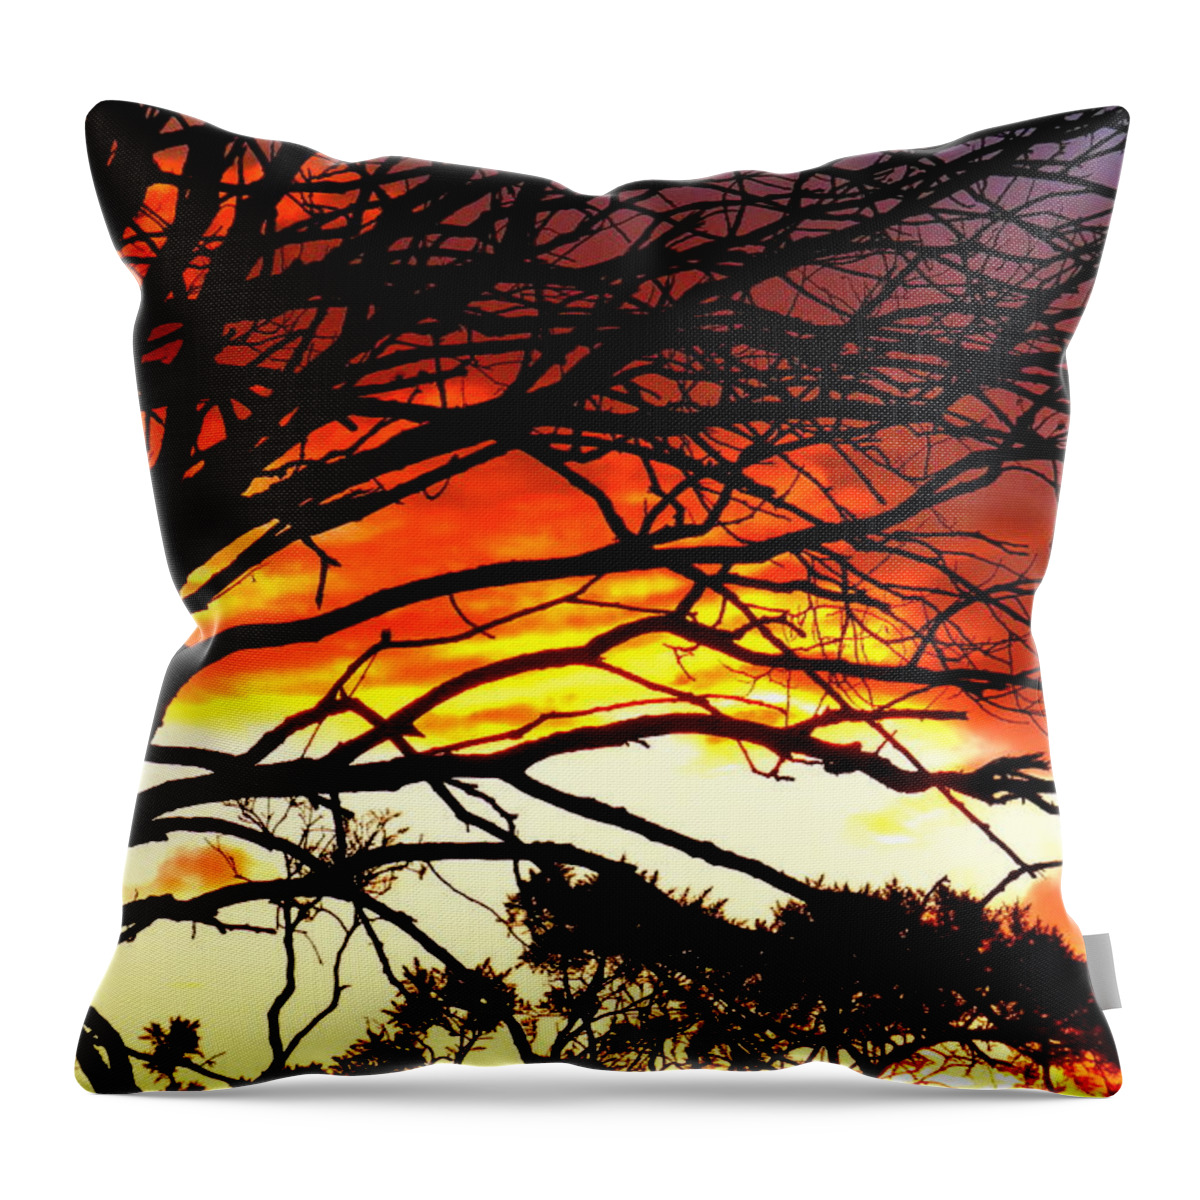 Sunset Throw Pillow featuring the photograph Sunset Tree Silhouette by Angel One